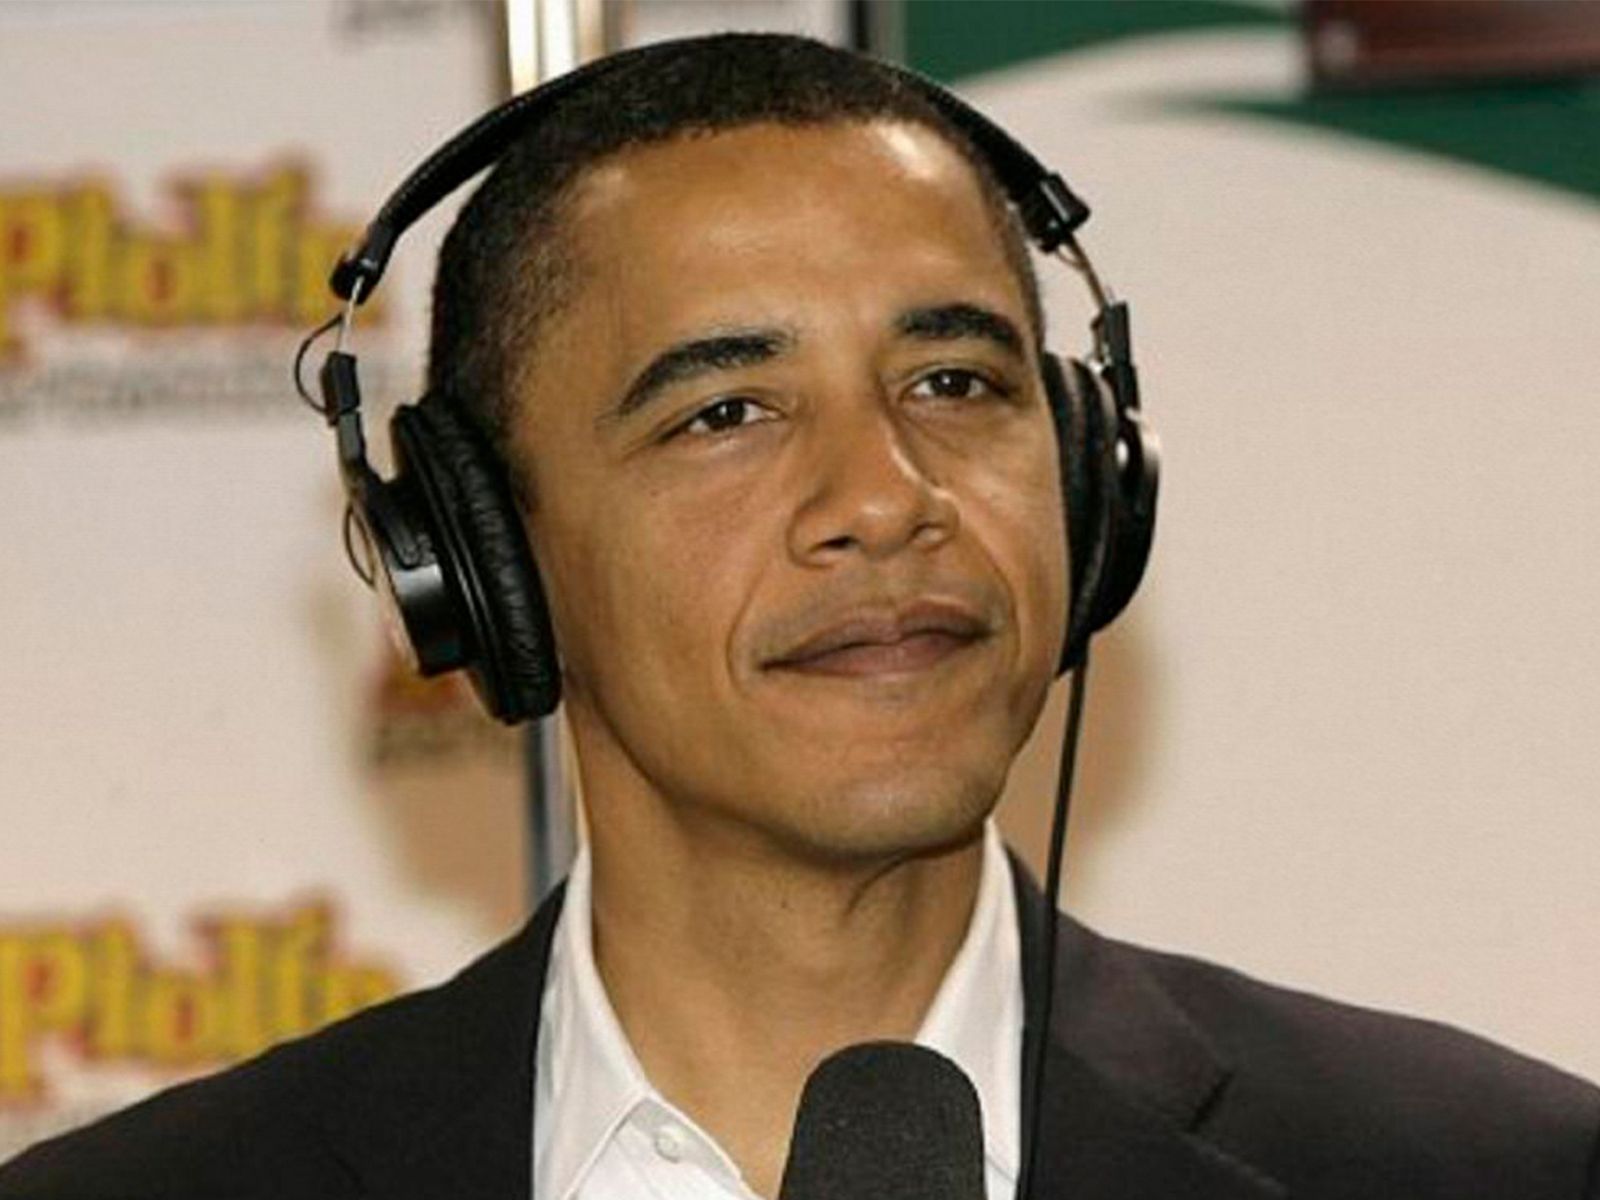 These are the songs Obama can’t stop listening to